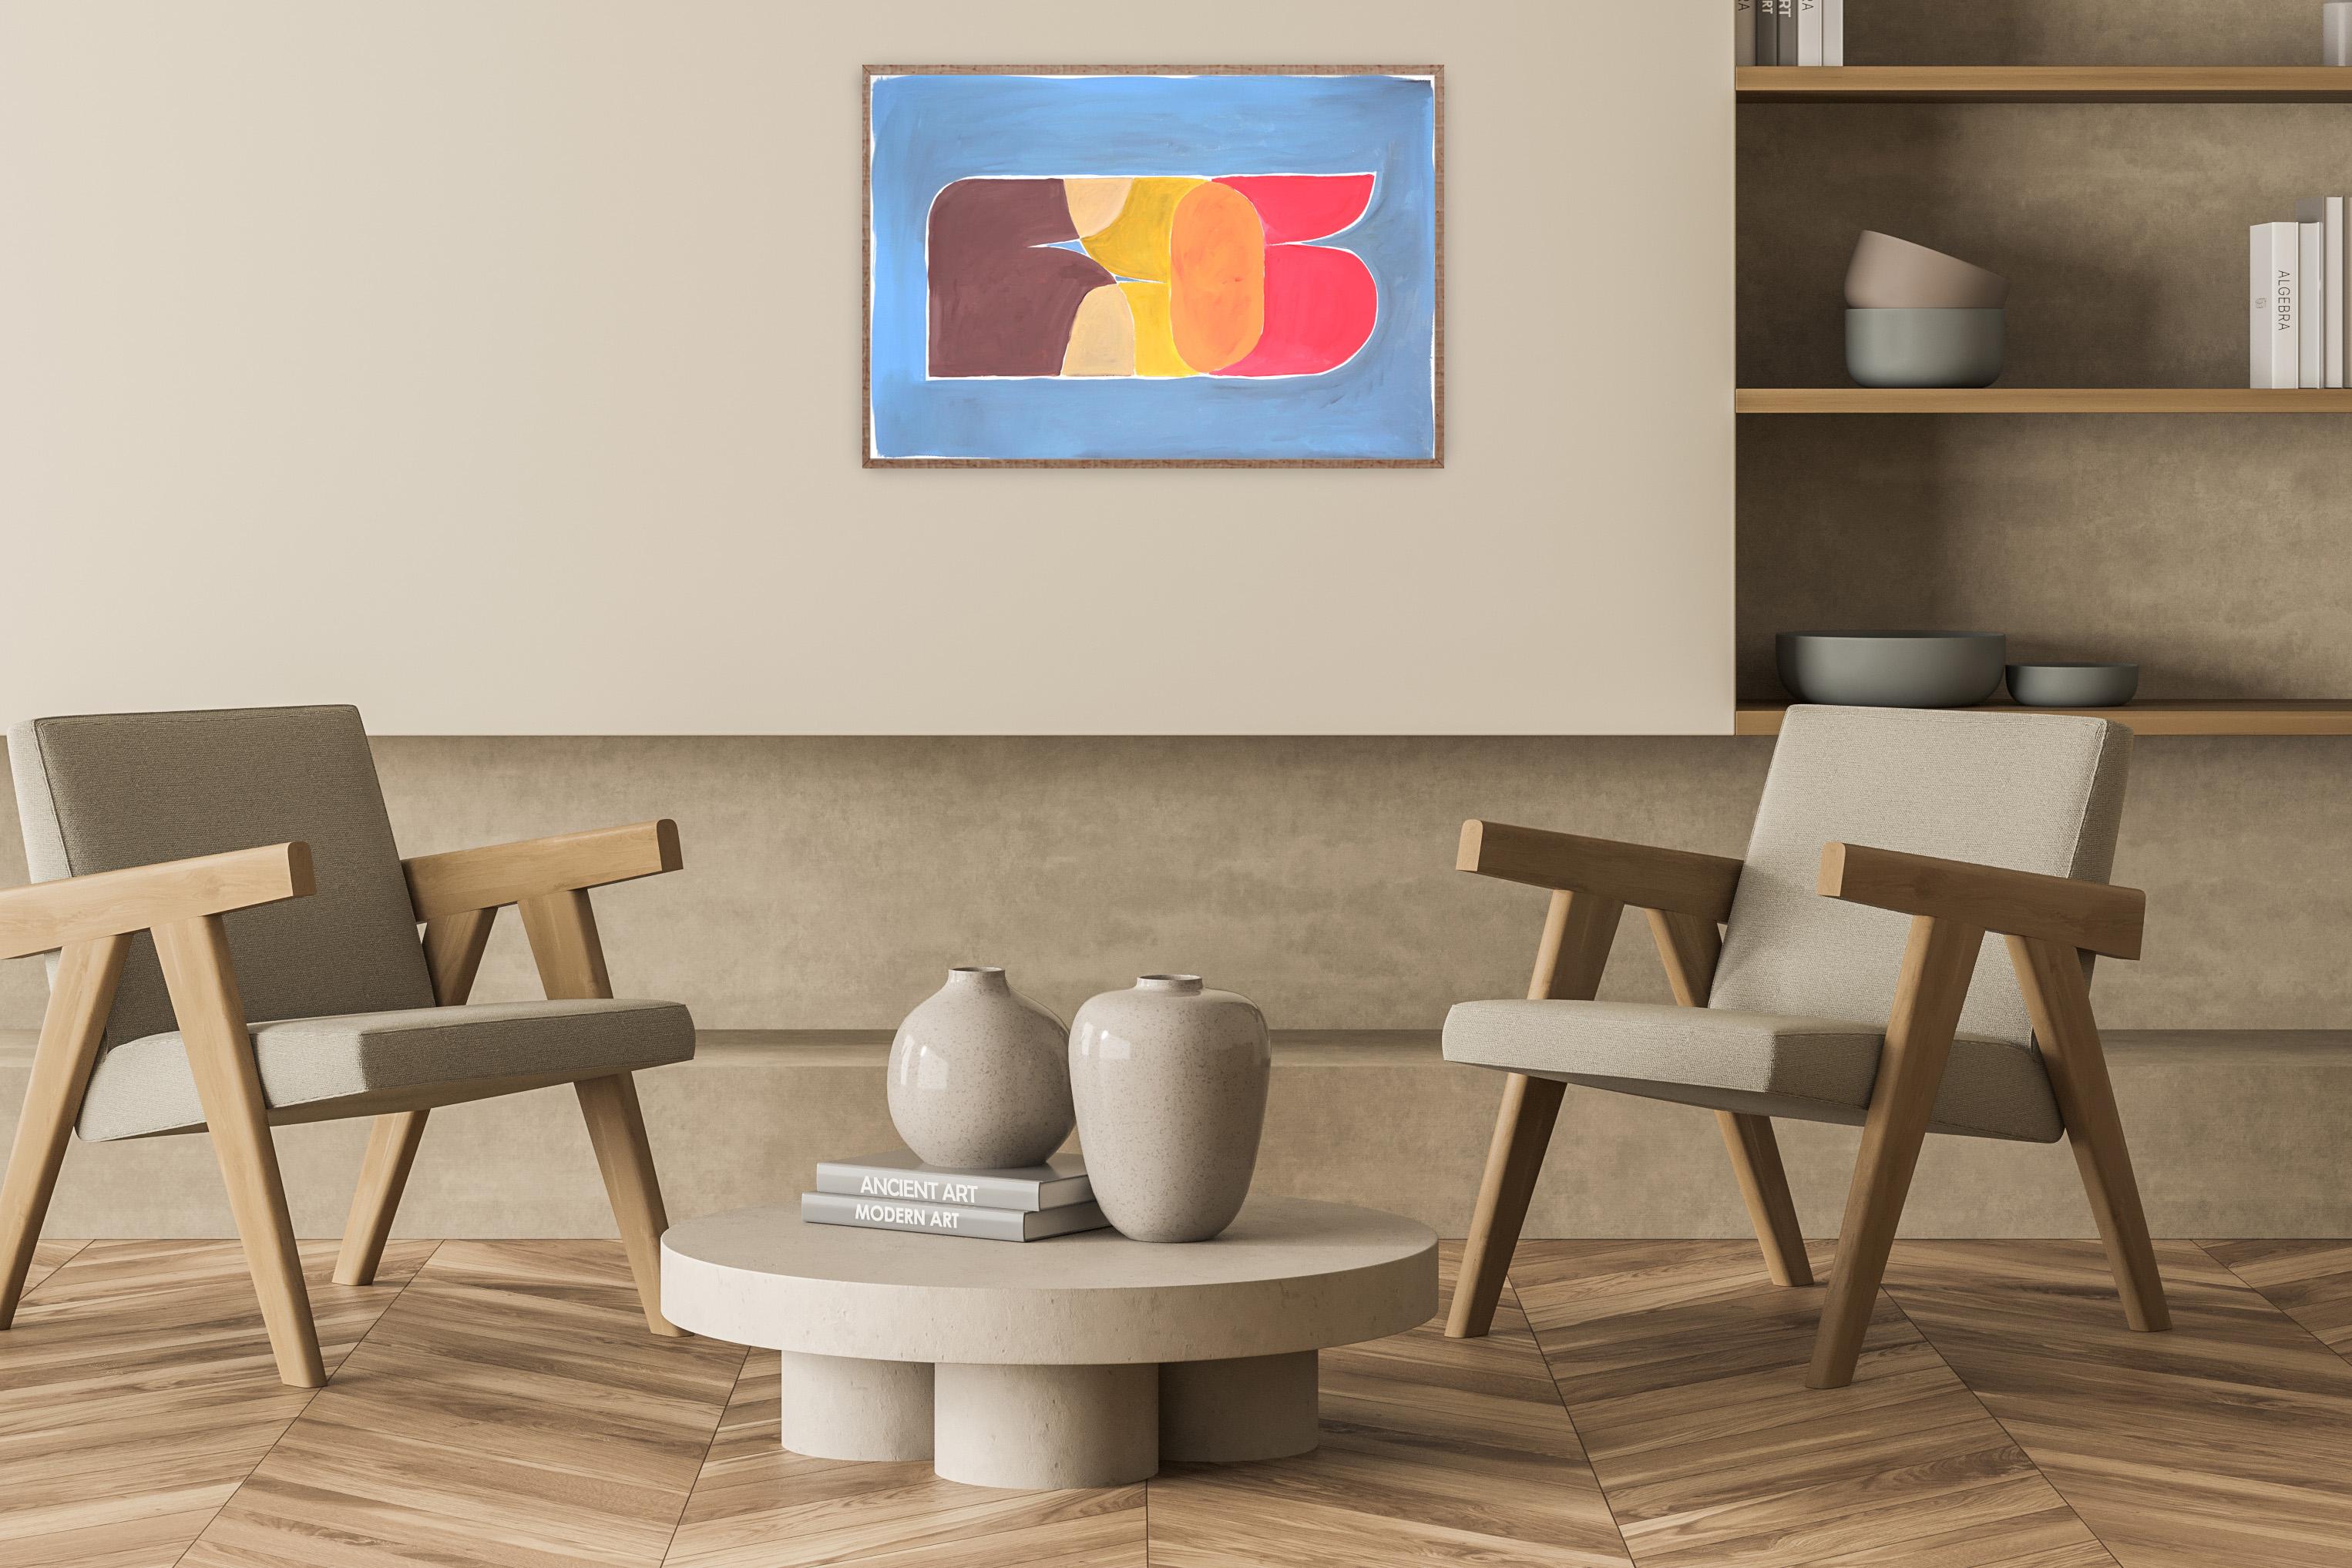 Abstracted Letter Sunset, Vintage Miami Style Colors, Earth Tones Figures  - Cubist Painting by Natalia Roman